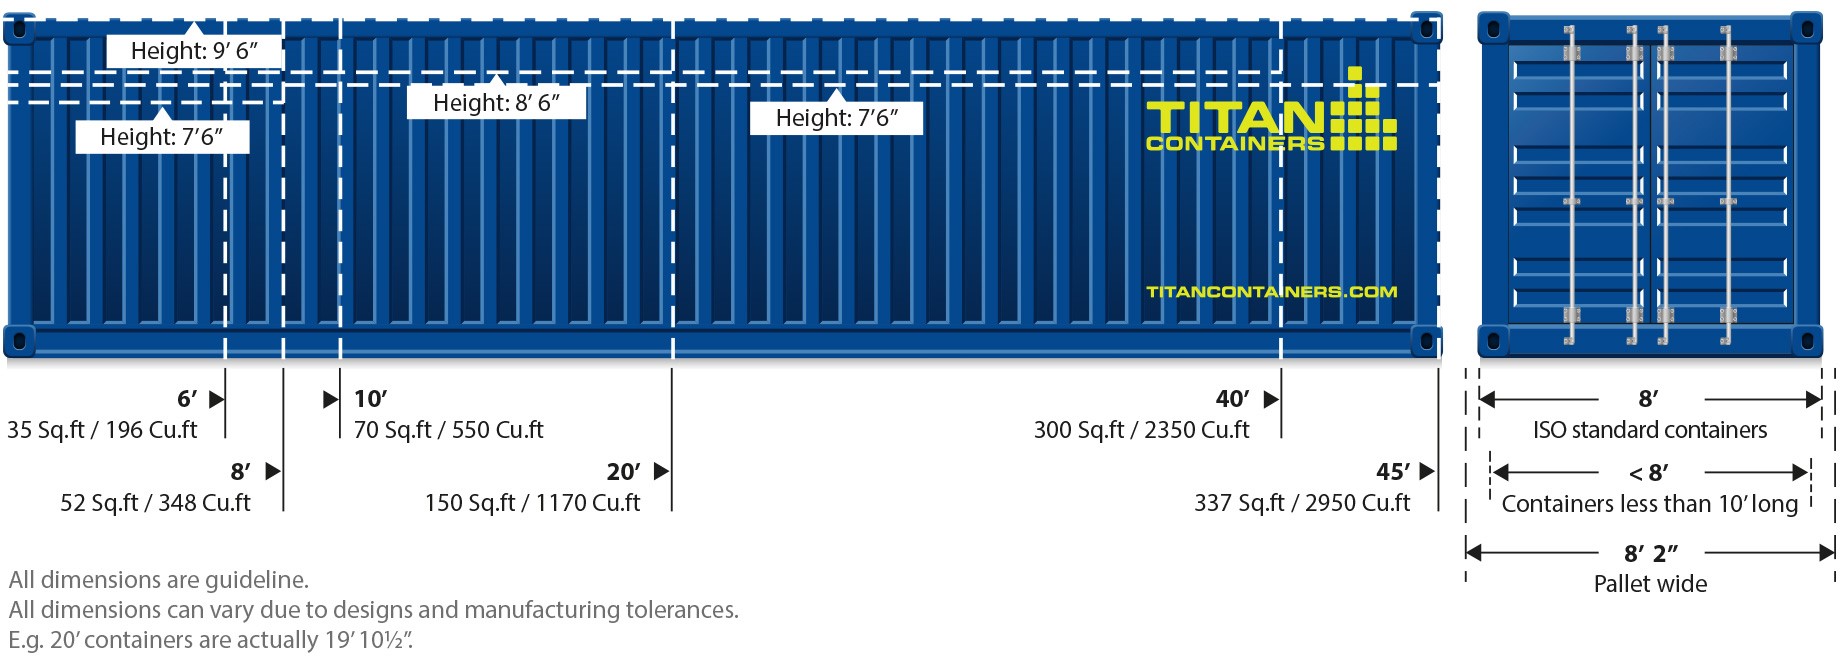 CONTAINER DIMENSIONS GUIDE TITAN CONTAINERS 6 8 10 20 40 FOOT